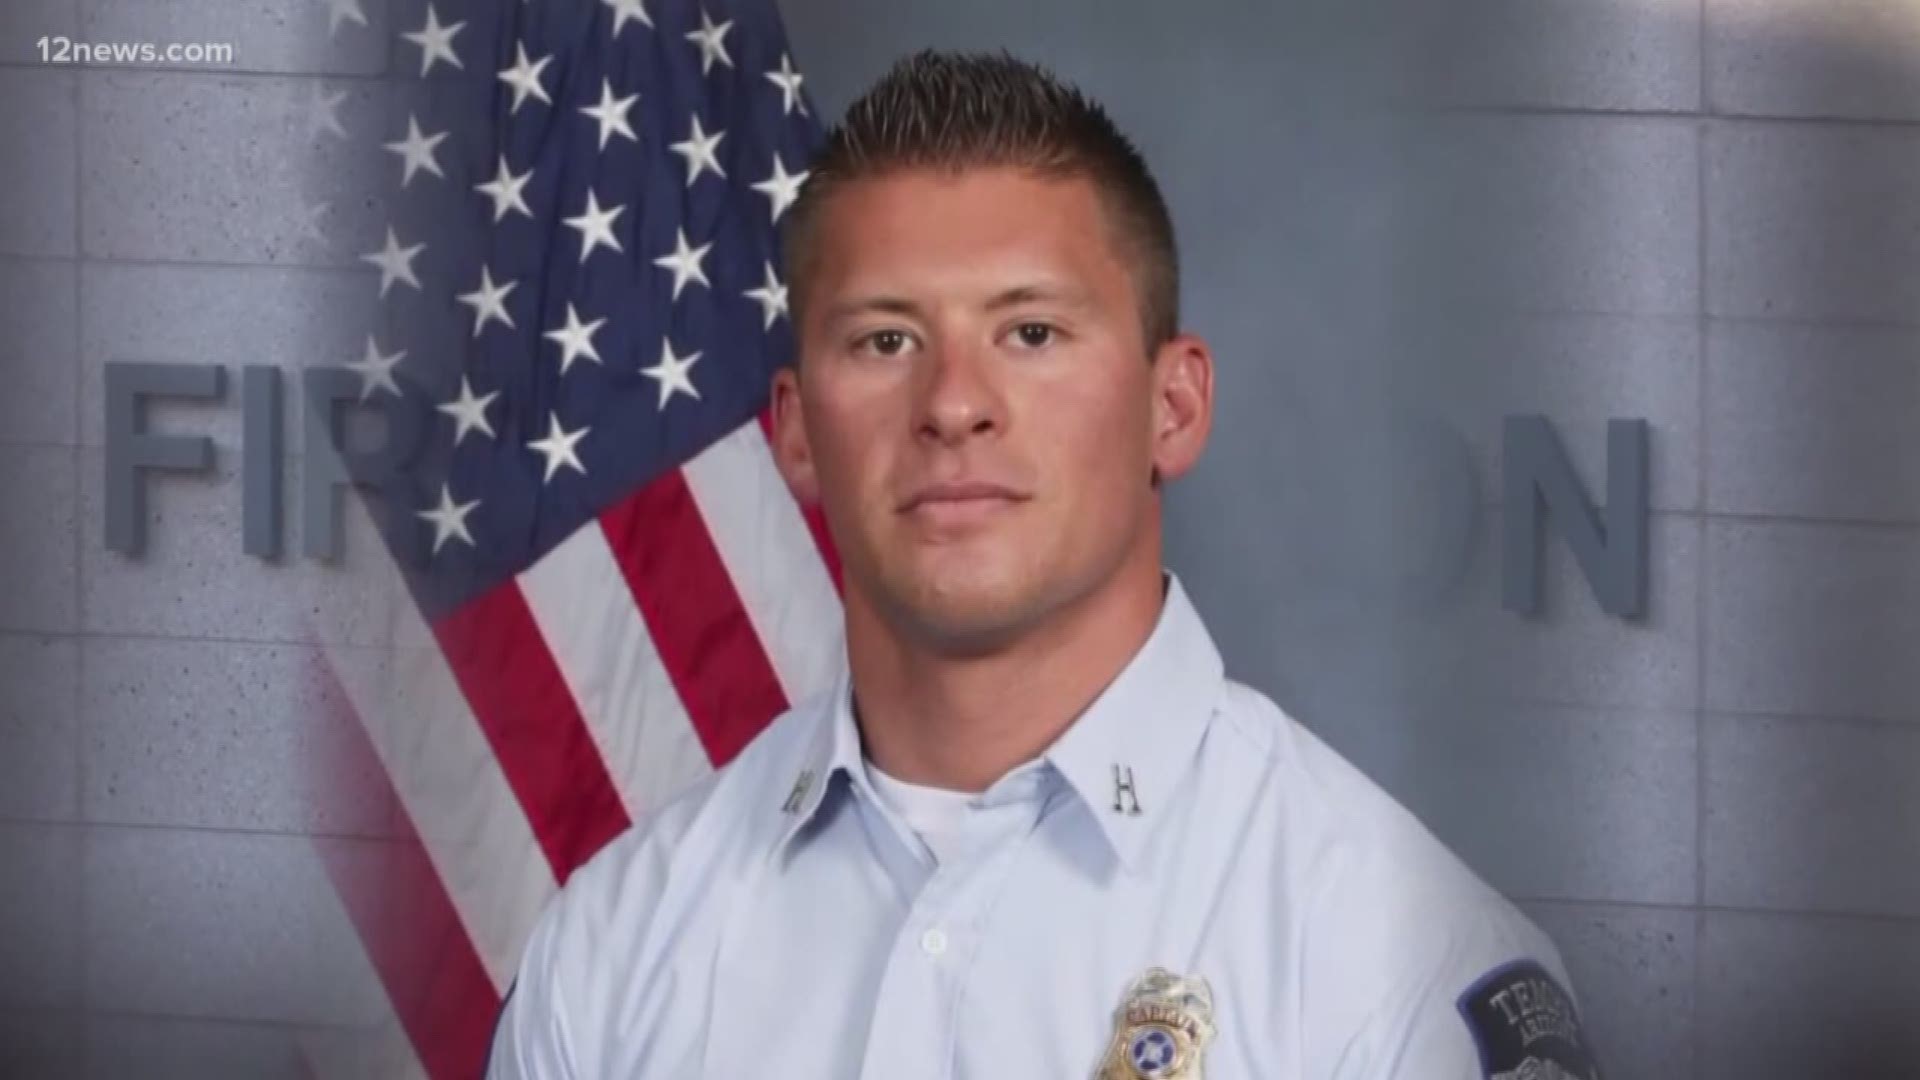 On Feb. 3, 2018, a Tempe firefighter was shot and killed in Old Town Scottsdale. The man who shot him has been convicted of 2nd-degree murder.